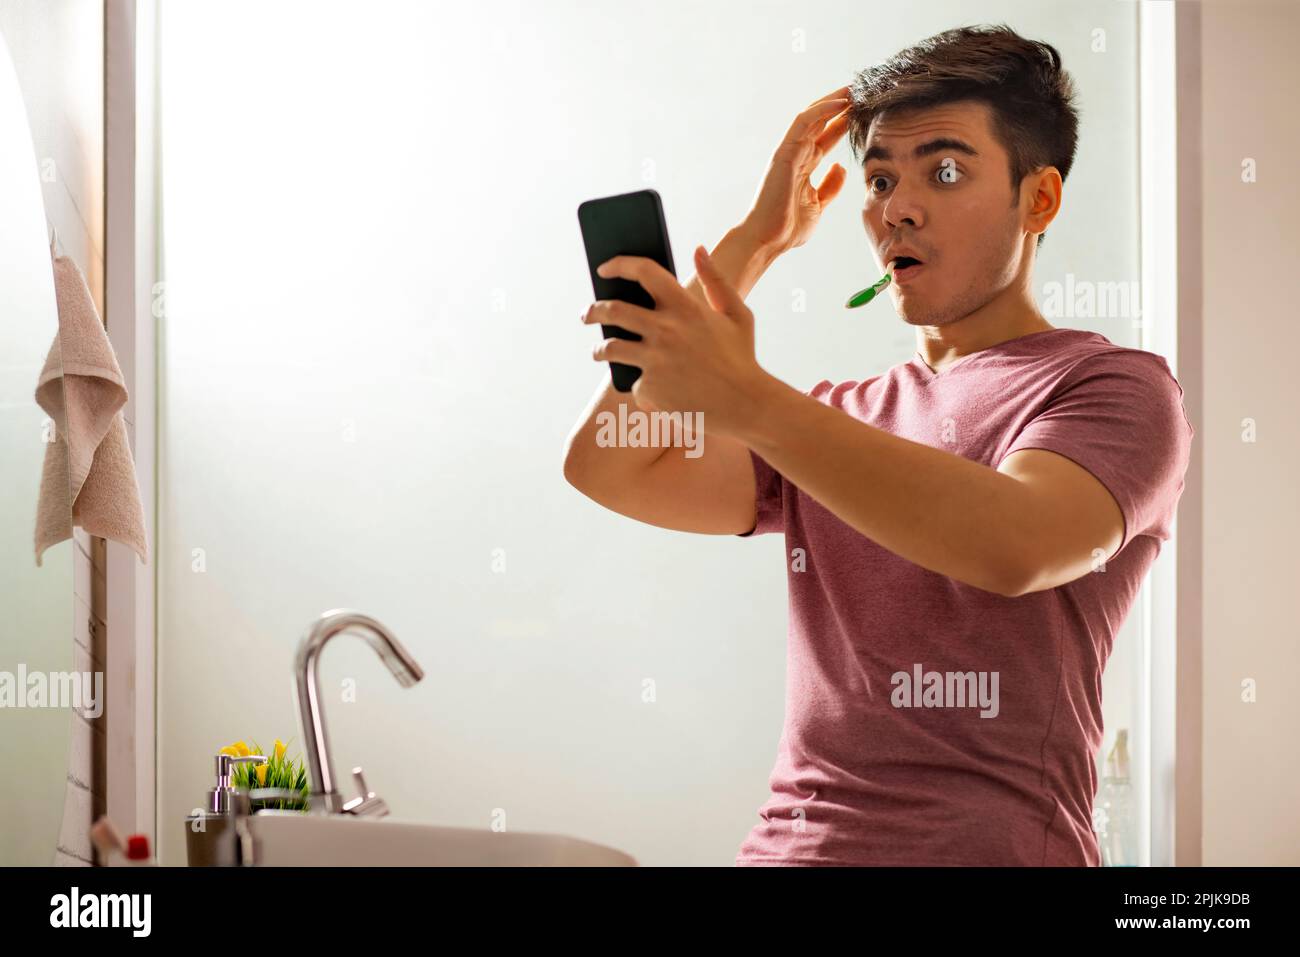 Young man using mobile phone while brushing teeth in bathroom Stock Photo